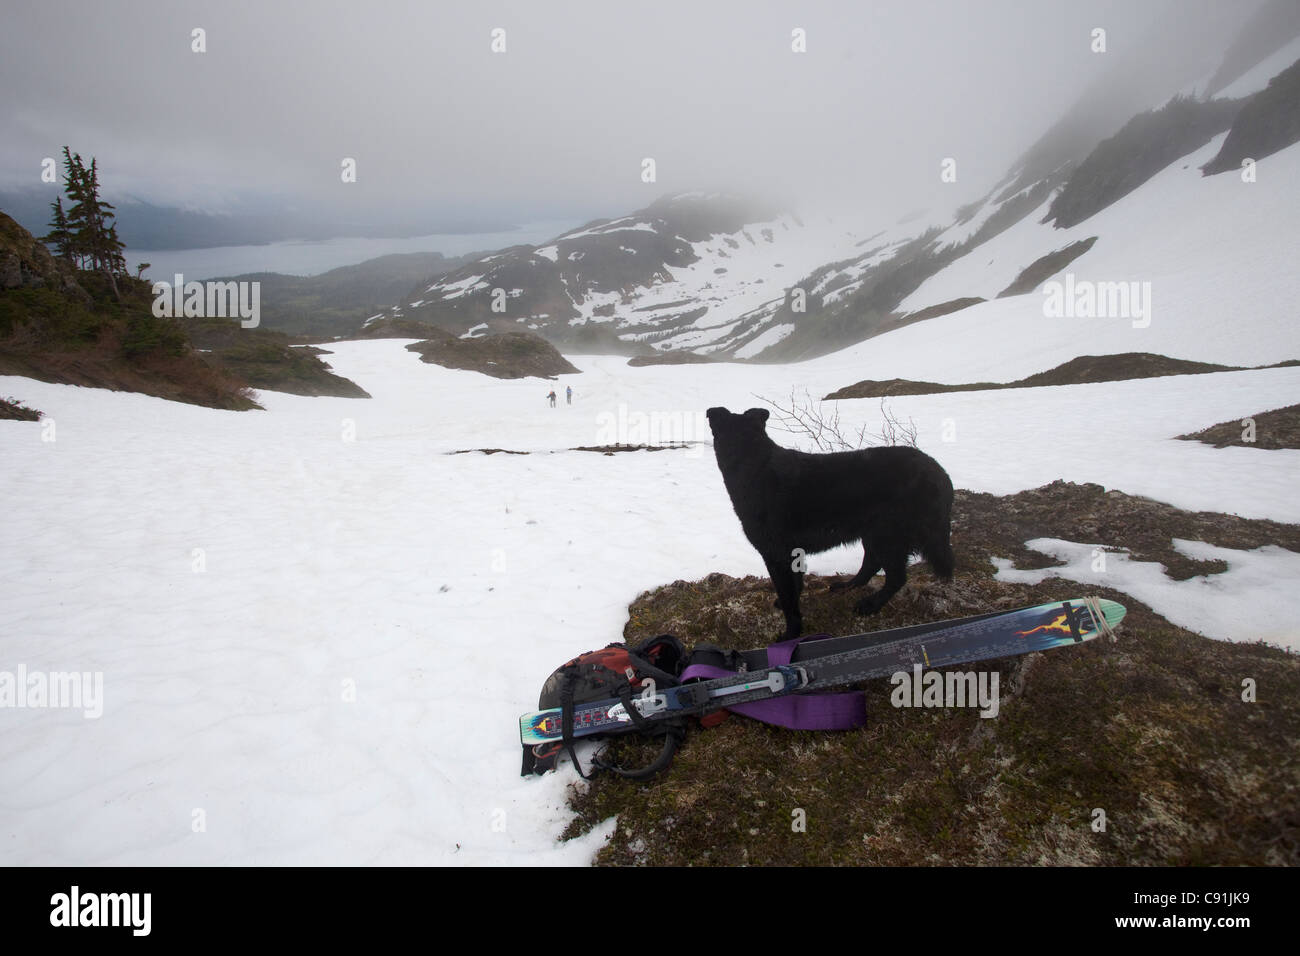 Dog stands next to skis watching skiers in the far distance, Heney Range, Chugach National Forest near Cordova, Alaska Stock Photo